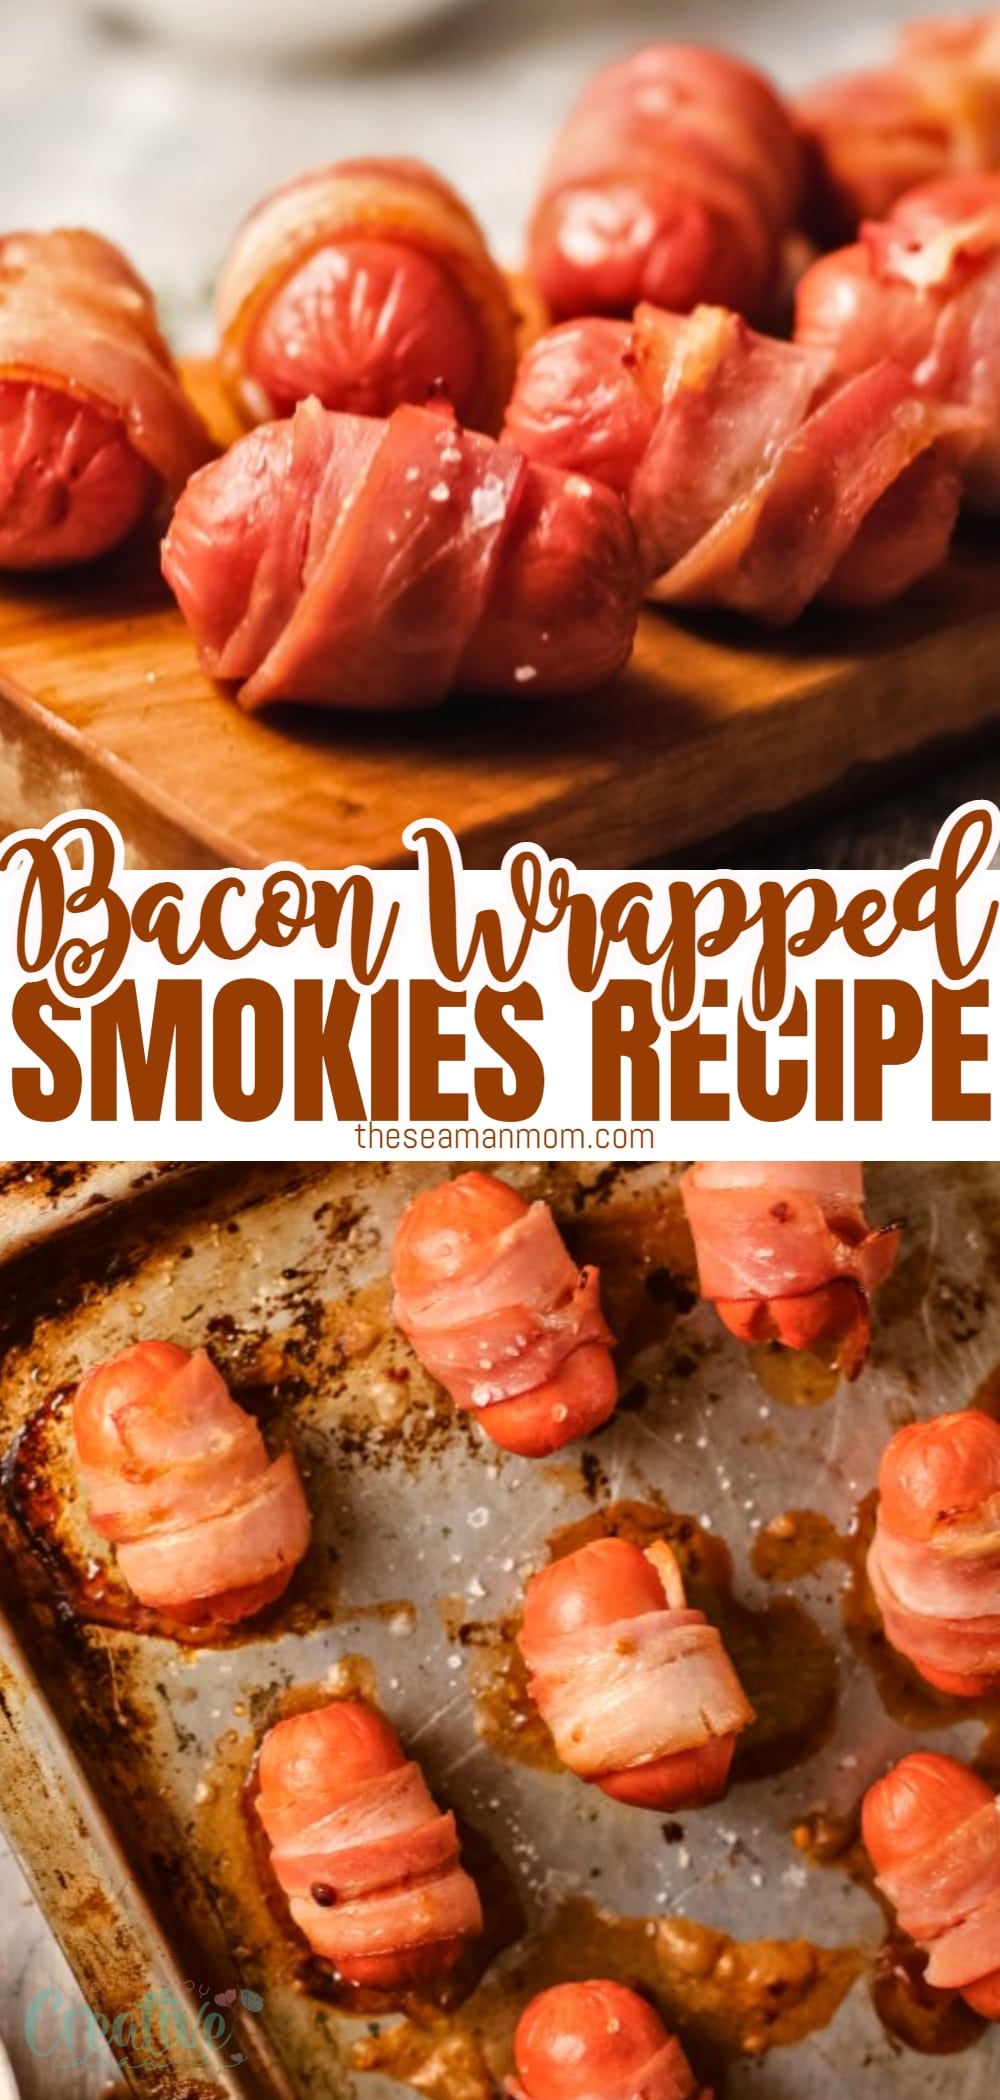 These bacon wrapped smokies are the perfect appetizer for any party or get together you plan to host! This delicious bacon wrapped smokies recipe has the perfect balance of sweetness + spiciness + saltiness and is super easy to make!  via @petroneagu